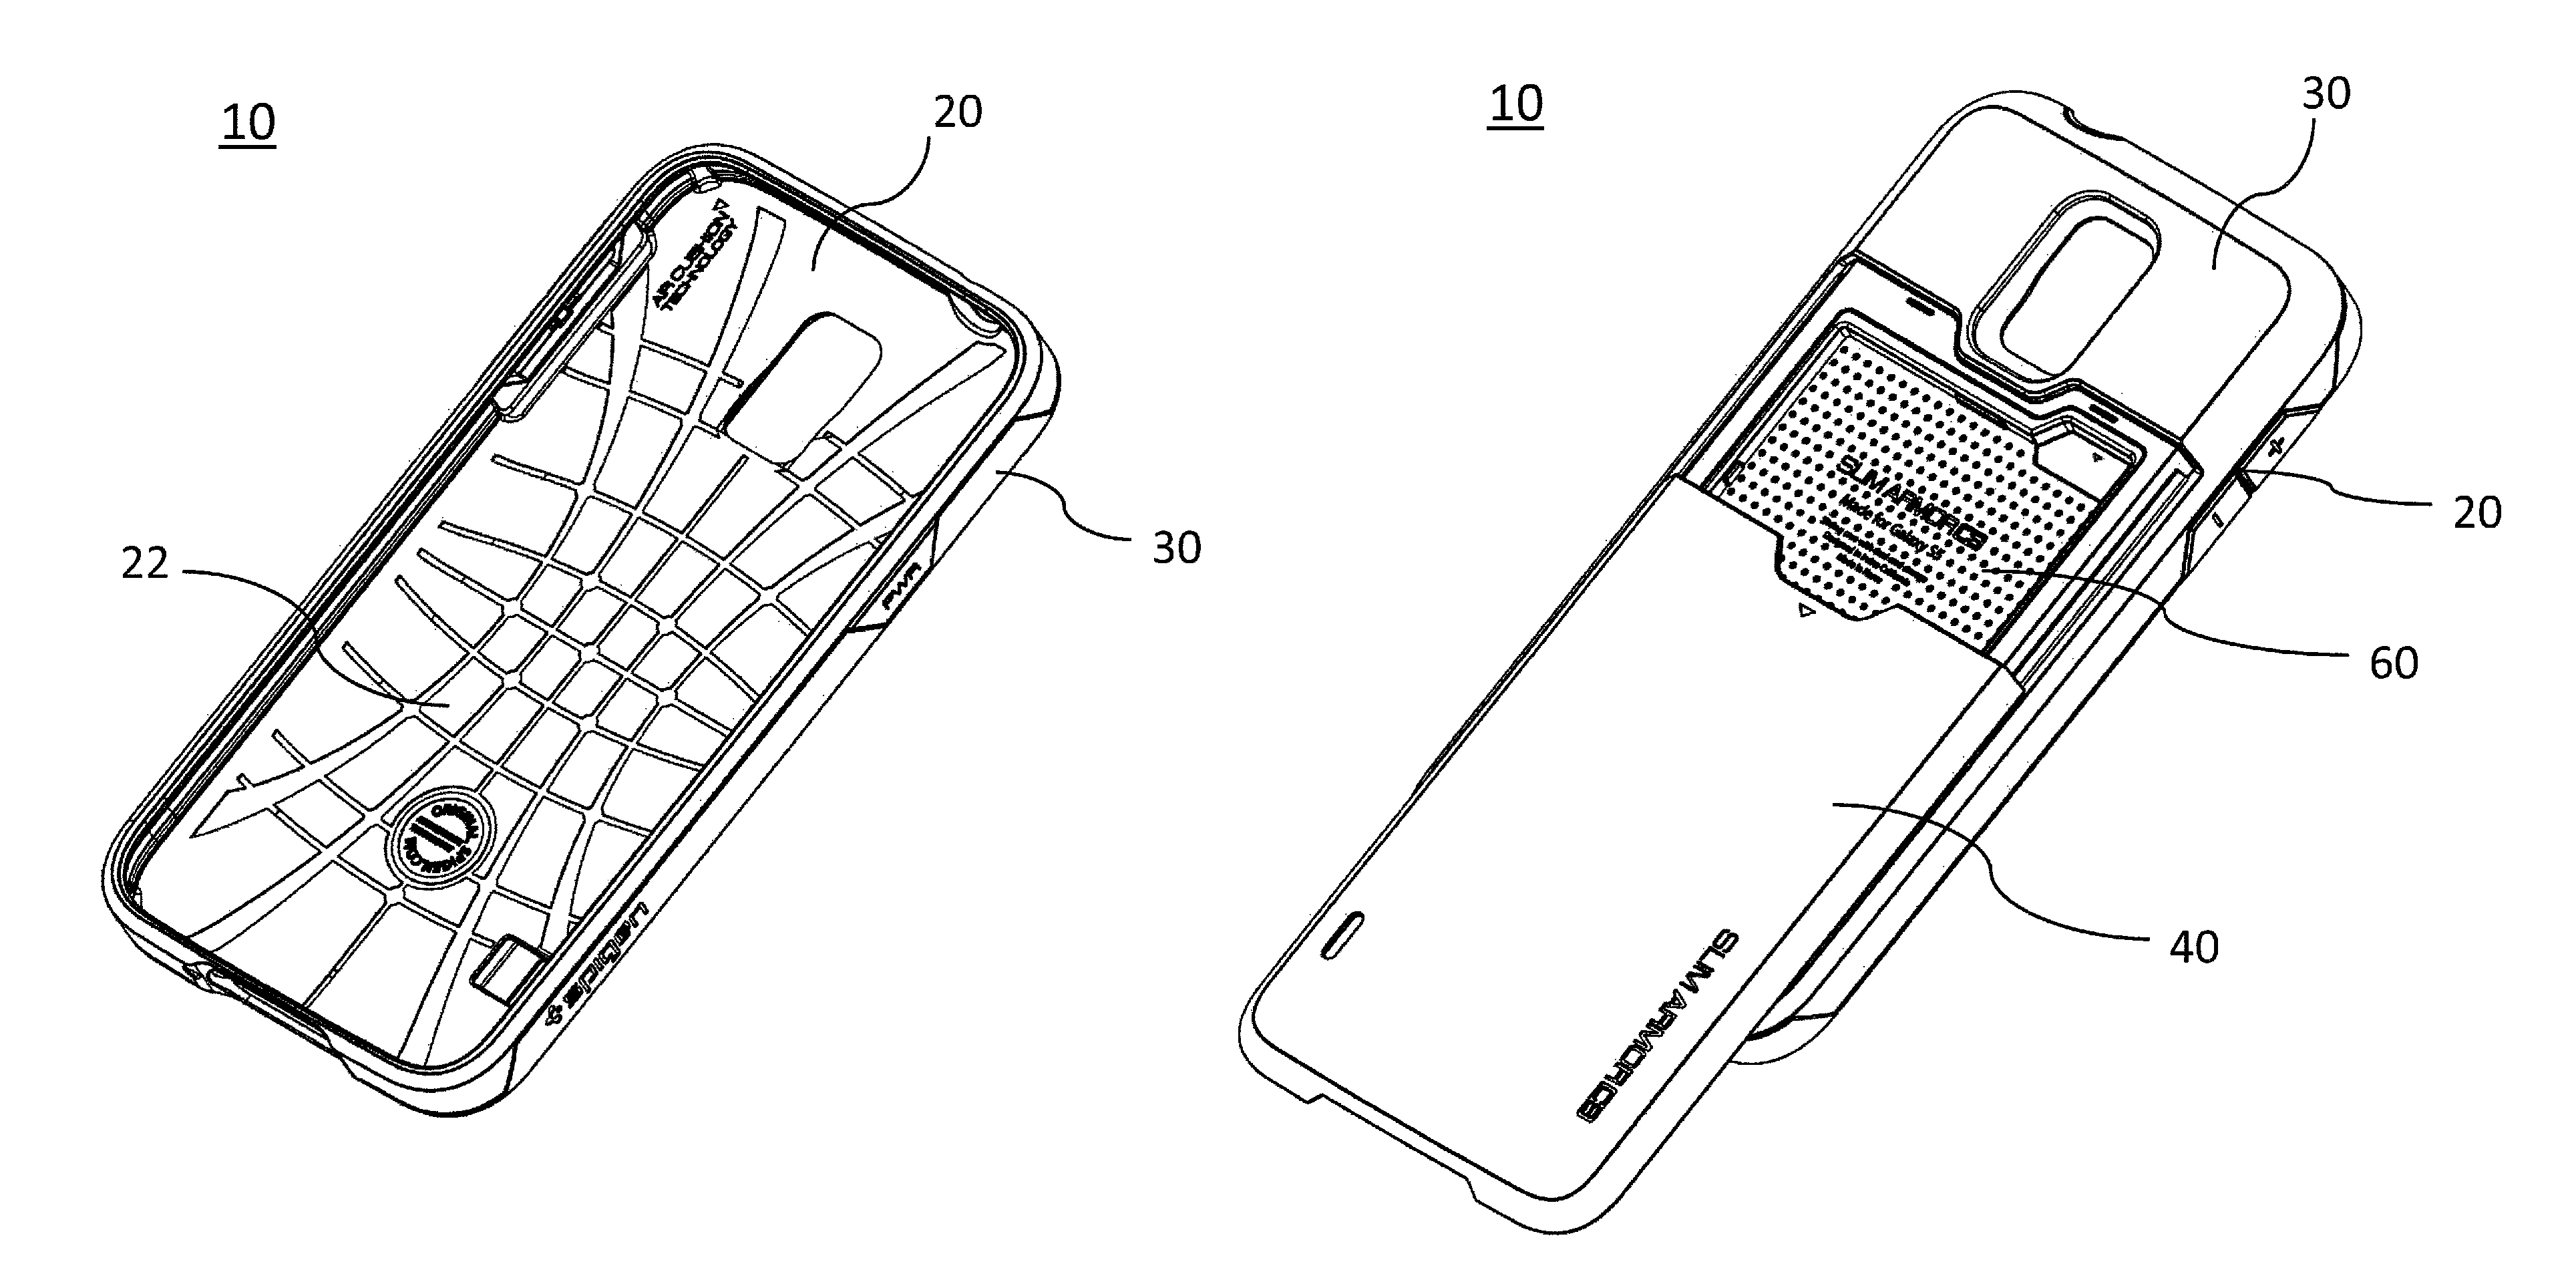 Case having a storage compartment for electronic devices